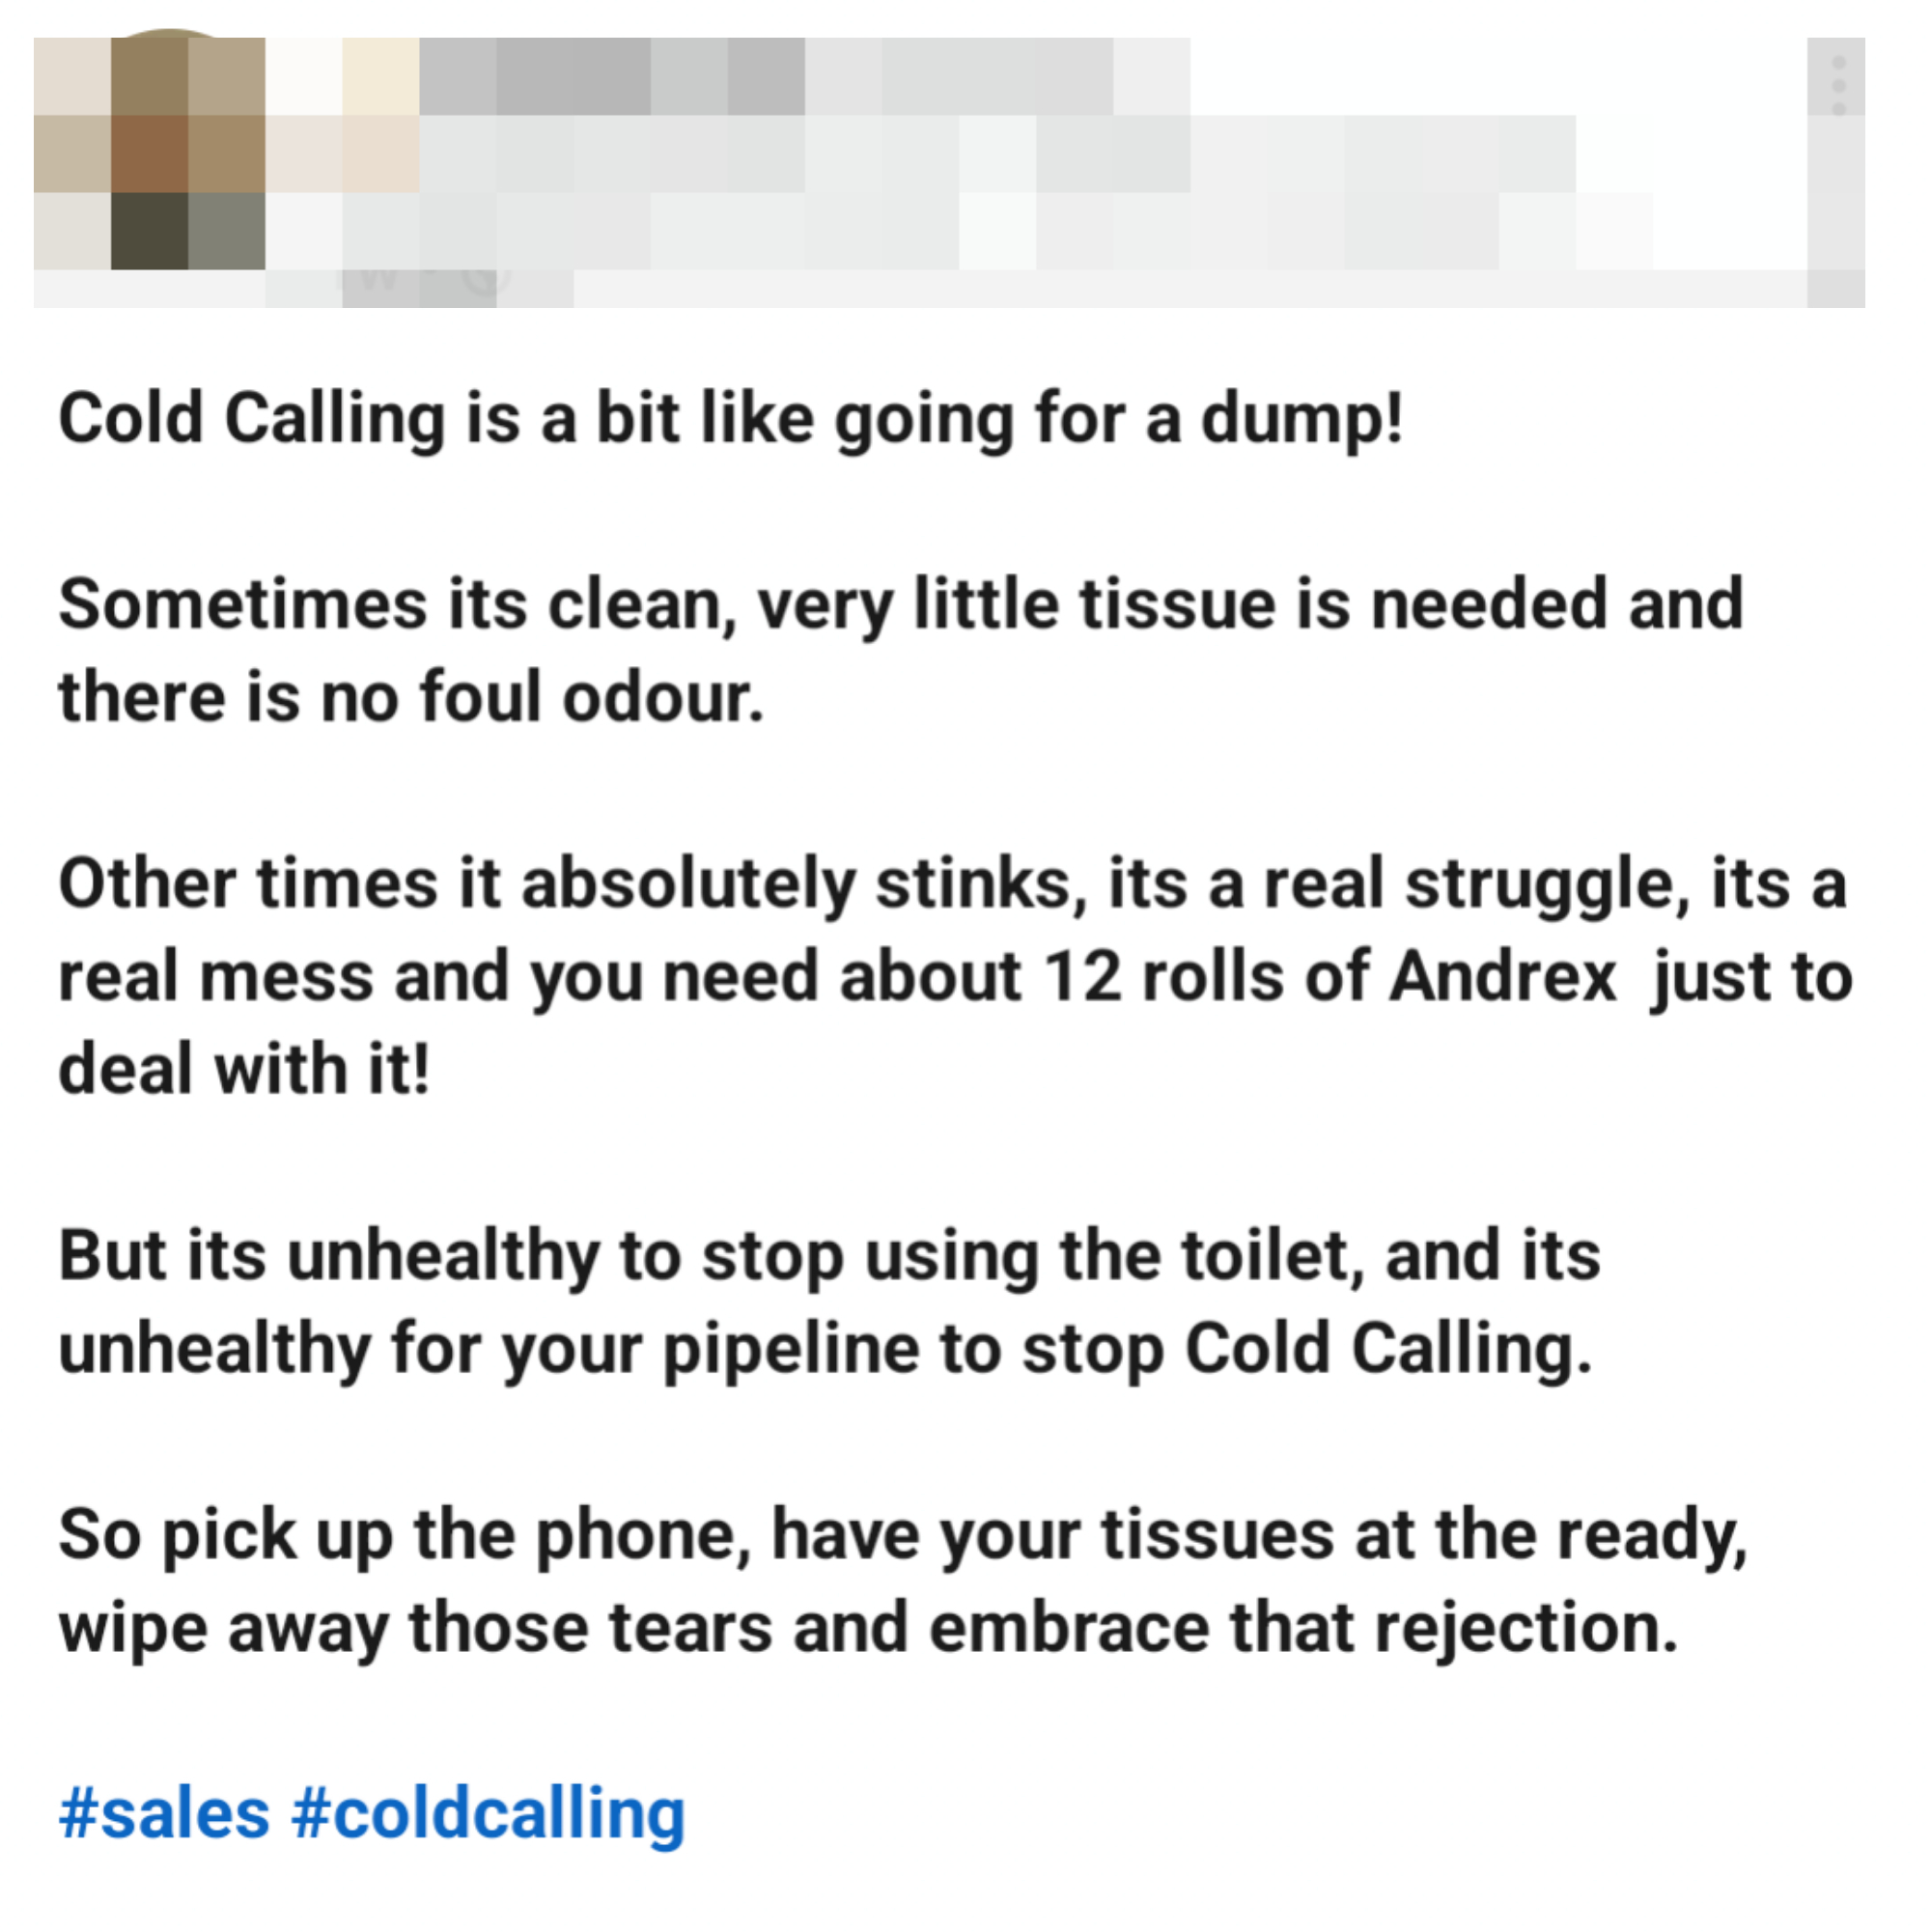 &quot;Cold Calling is a bit like going for a dump!&quot;